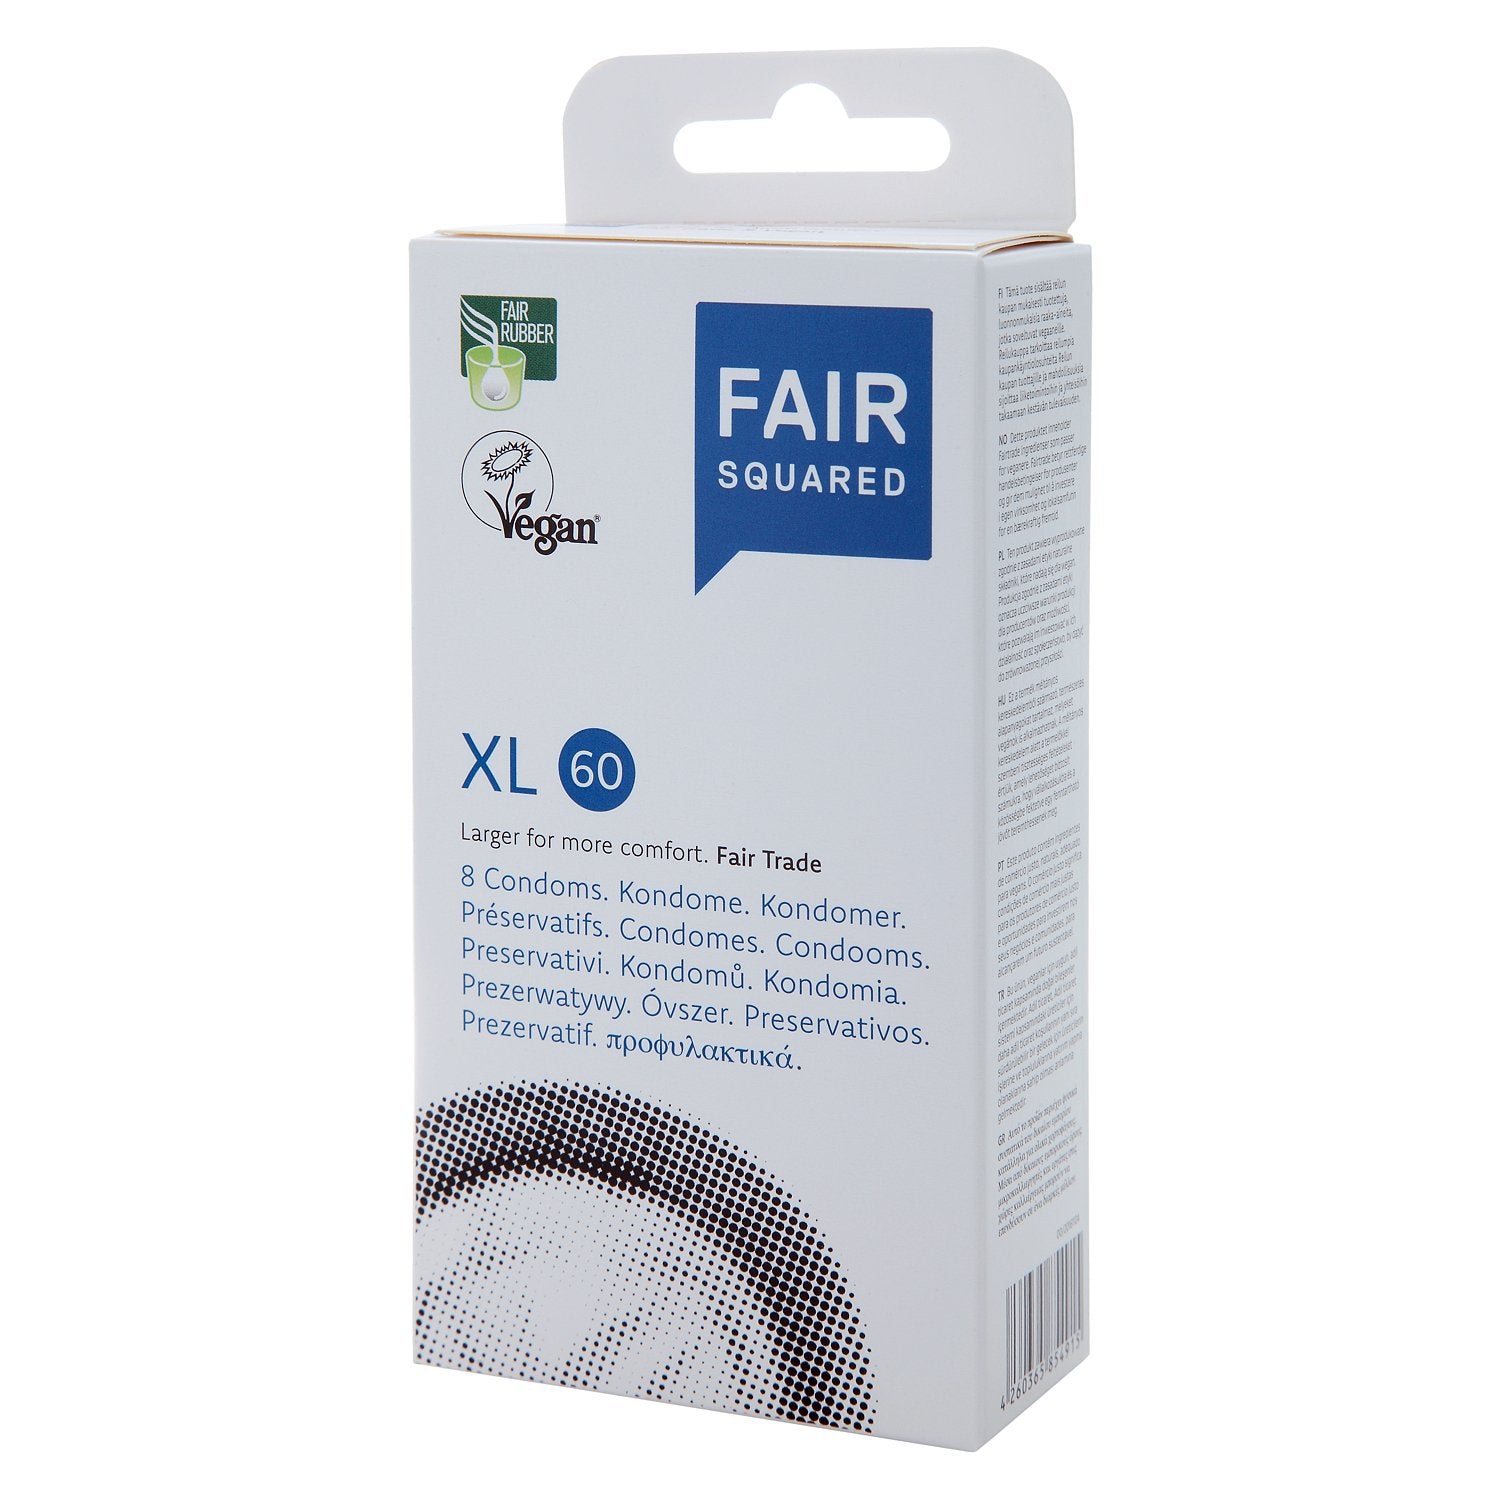 FAIR SQUARED Condoms XL 60 | Natural Latex, Transparent & Lubricated | Fairtrade | Vegan | 8 Pack | Made in Germany